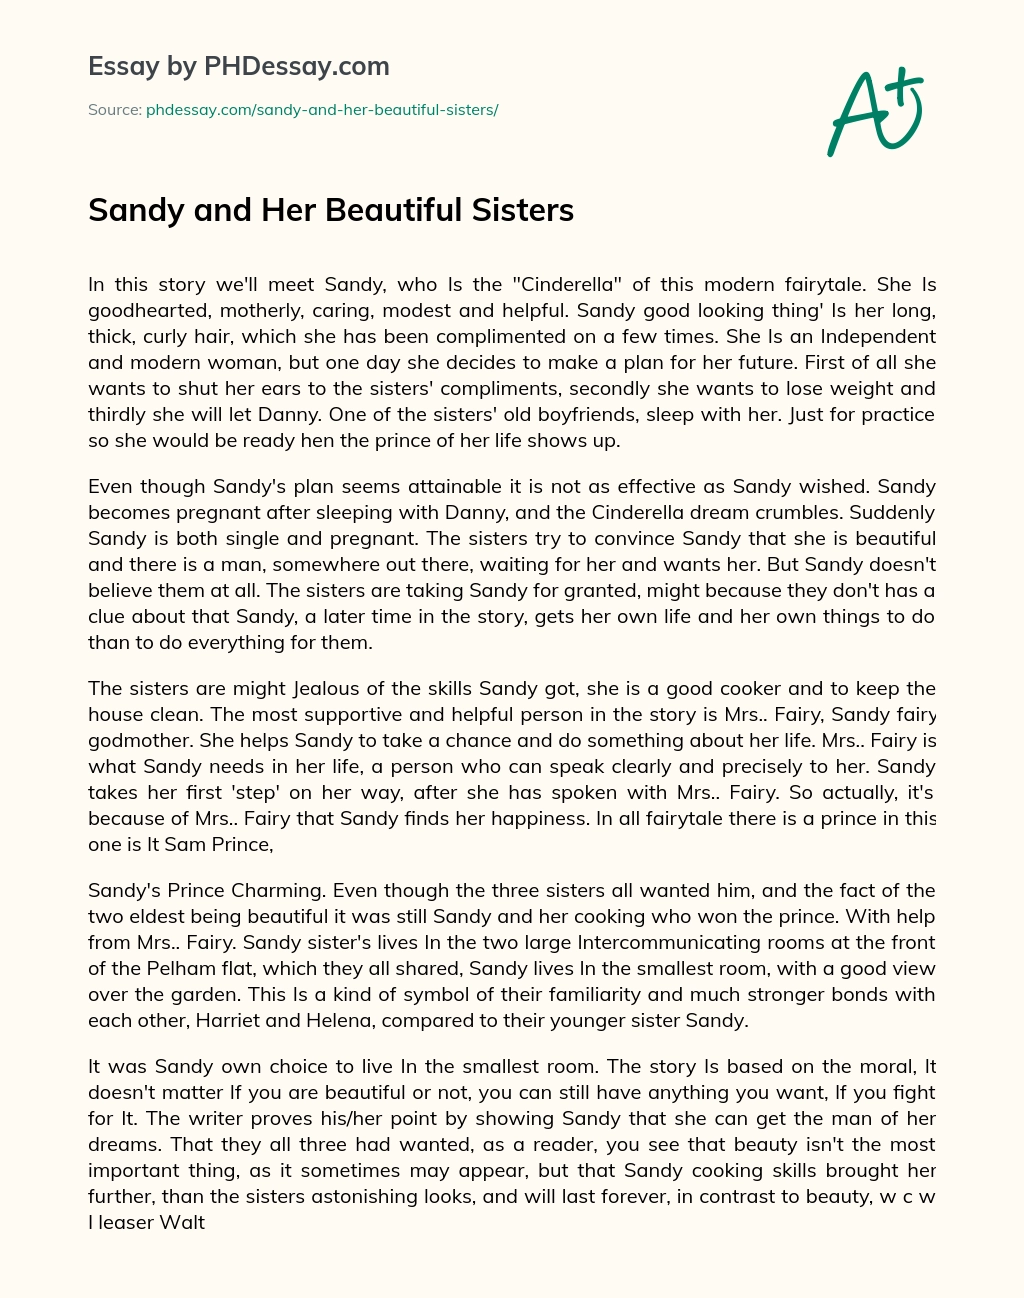 Sandy and Her Beautiful Sisters essay